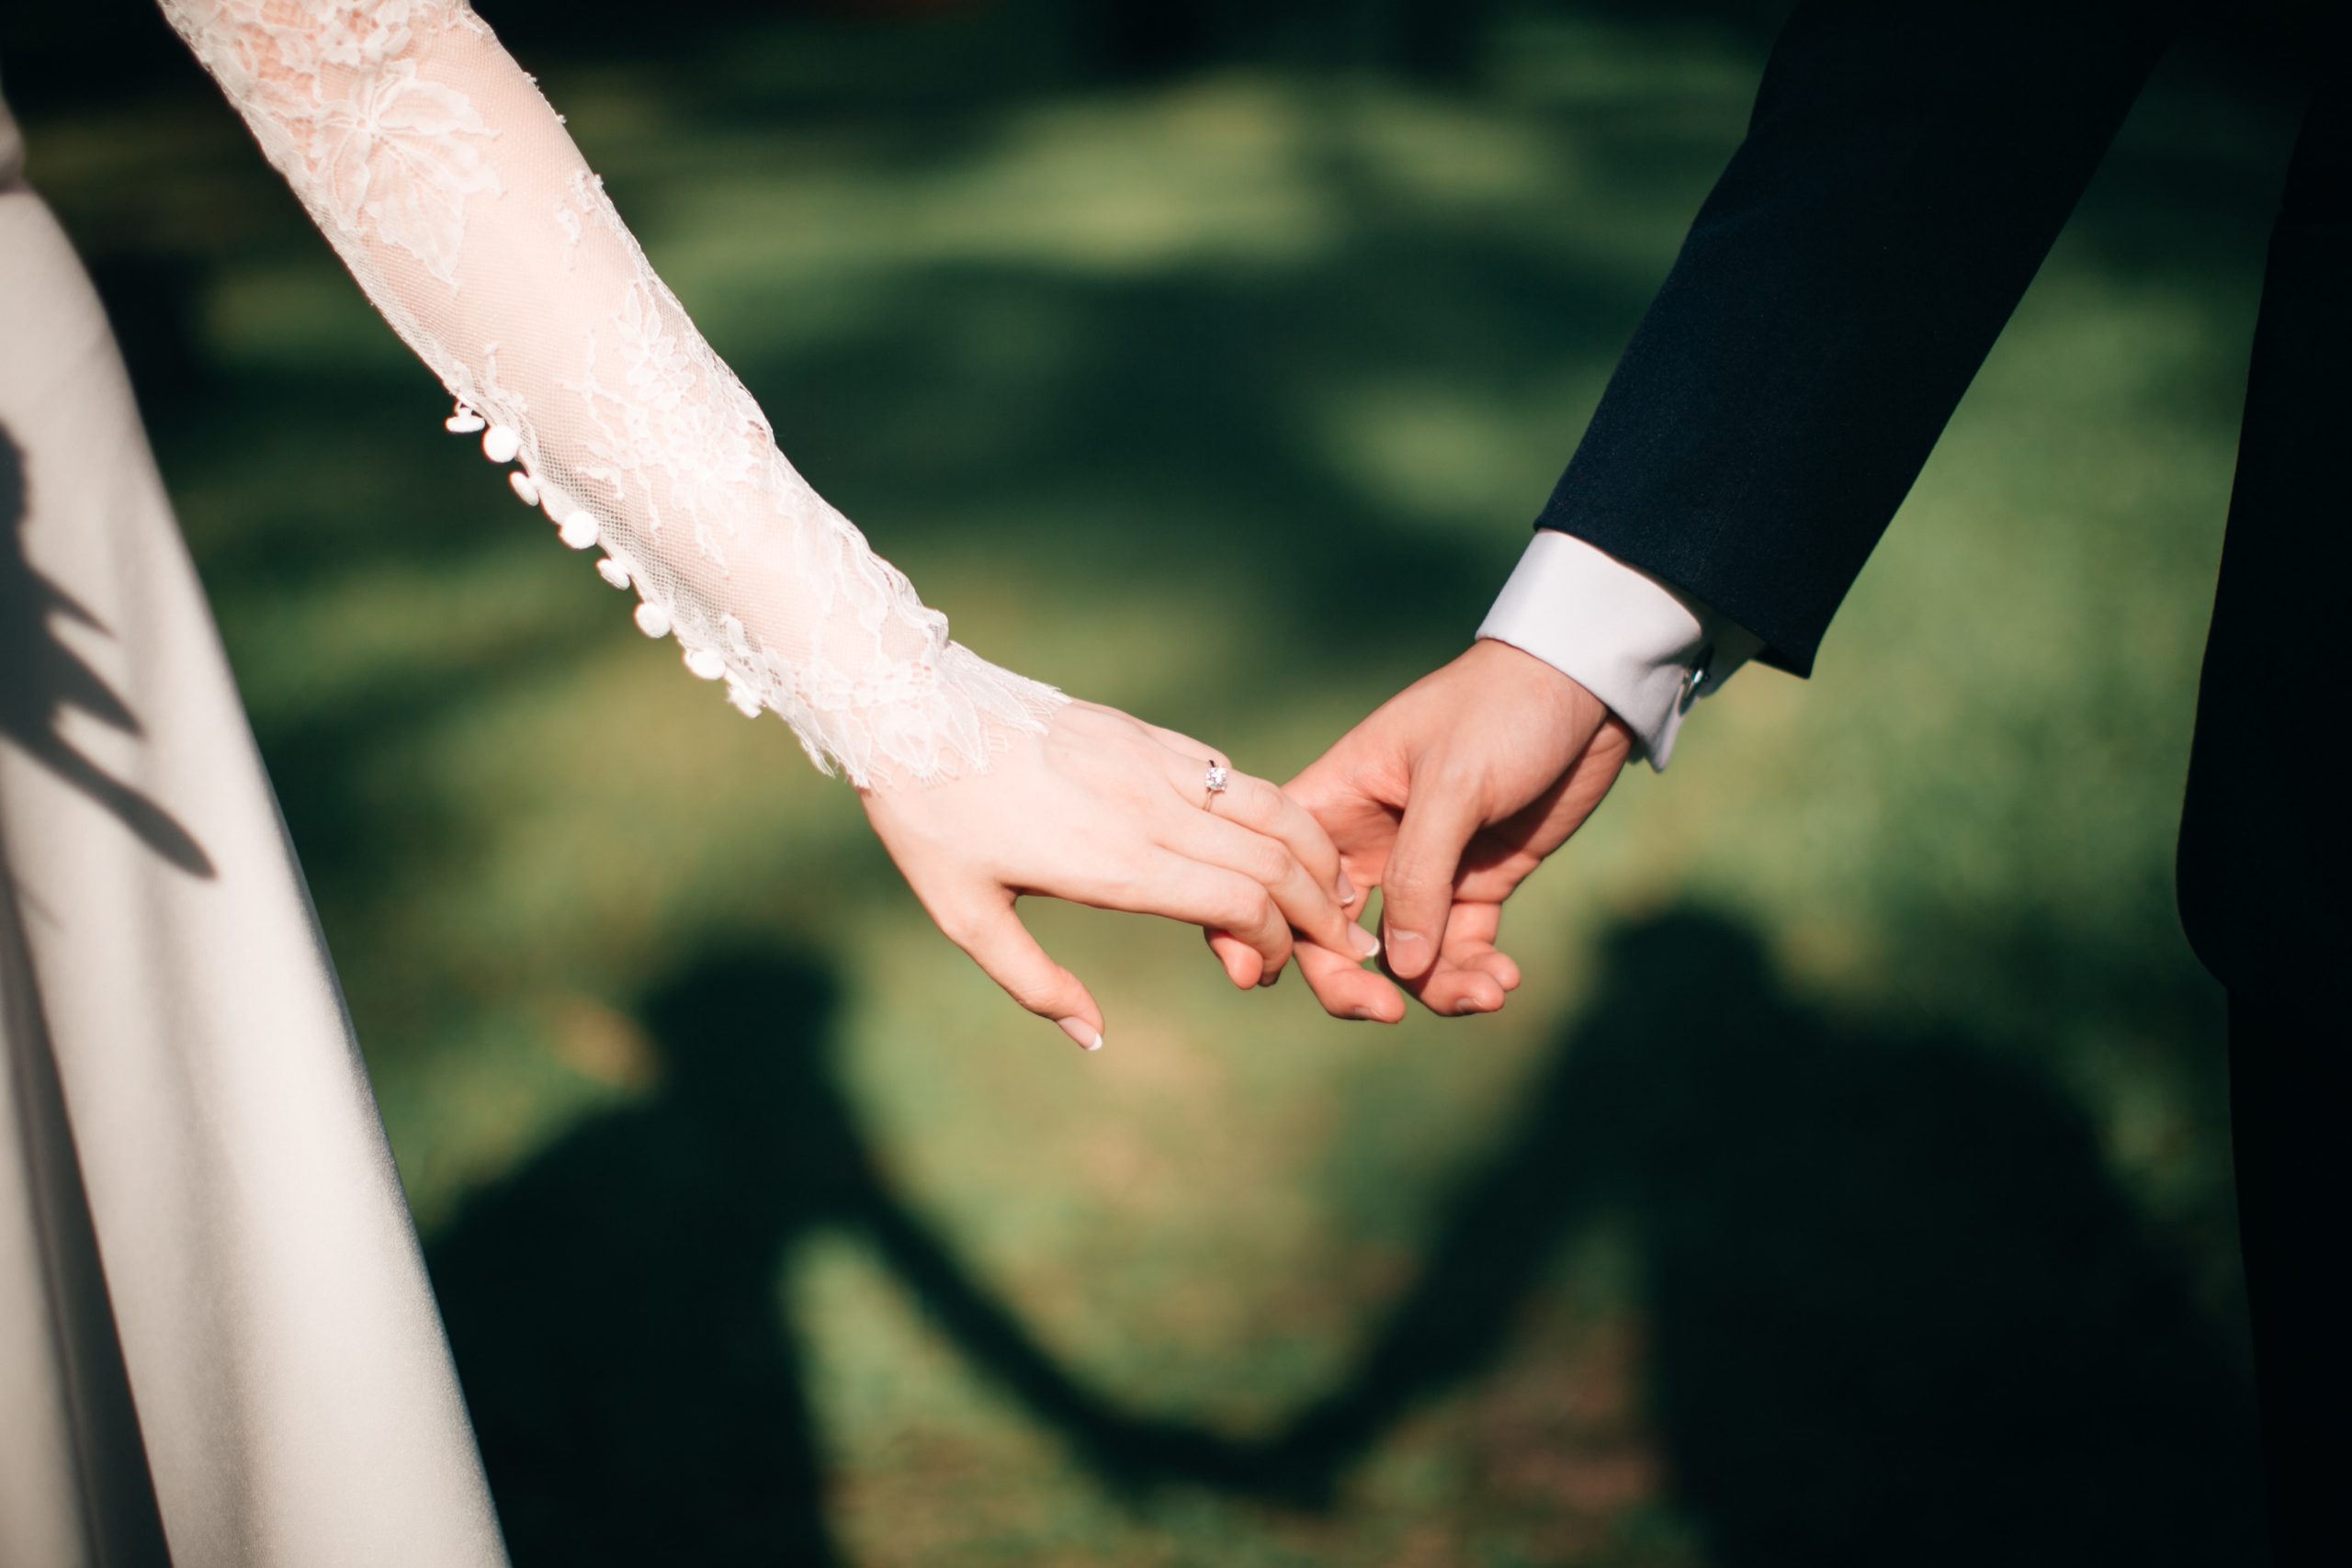 NEWS | Eligible married couples or people in a civil partnership could reduce their tax by up to £252 a year by signing up to Marriage Allowance